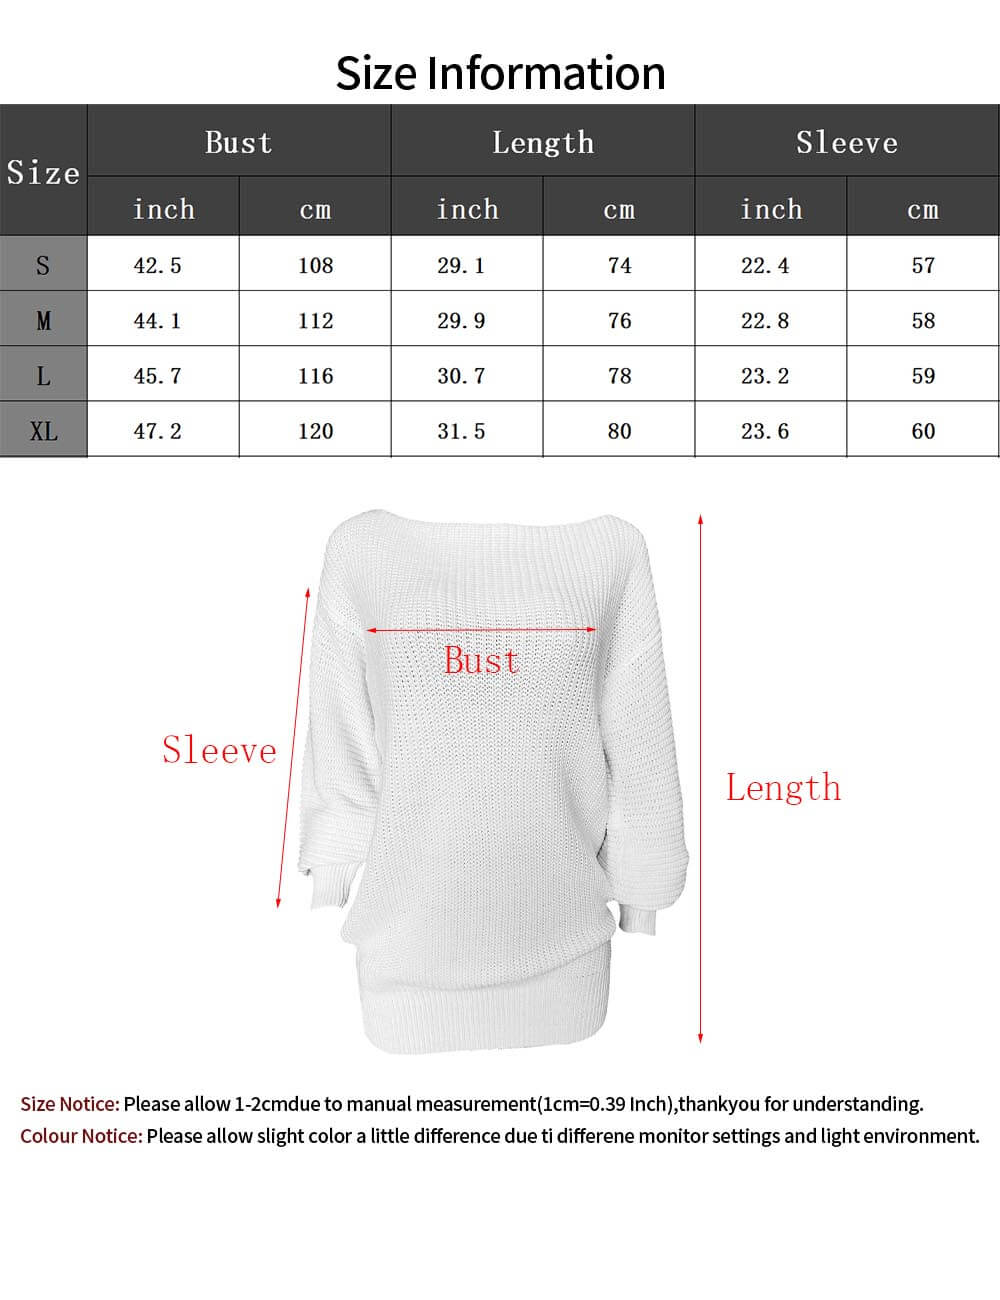  Women's Casual Oversized Off Shoulder Sweater Dresses Long Batwing Sleeve Chunky Pullover Jumper Tops